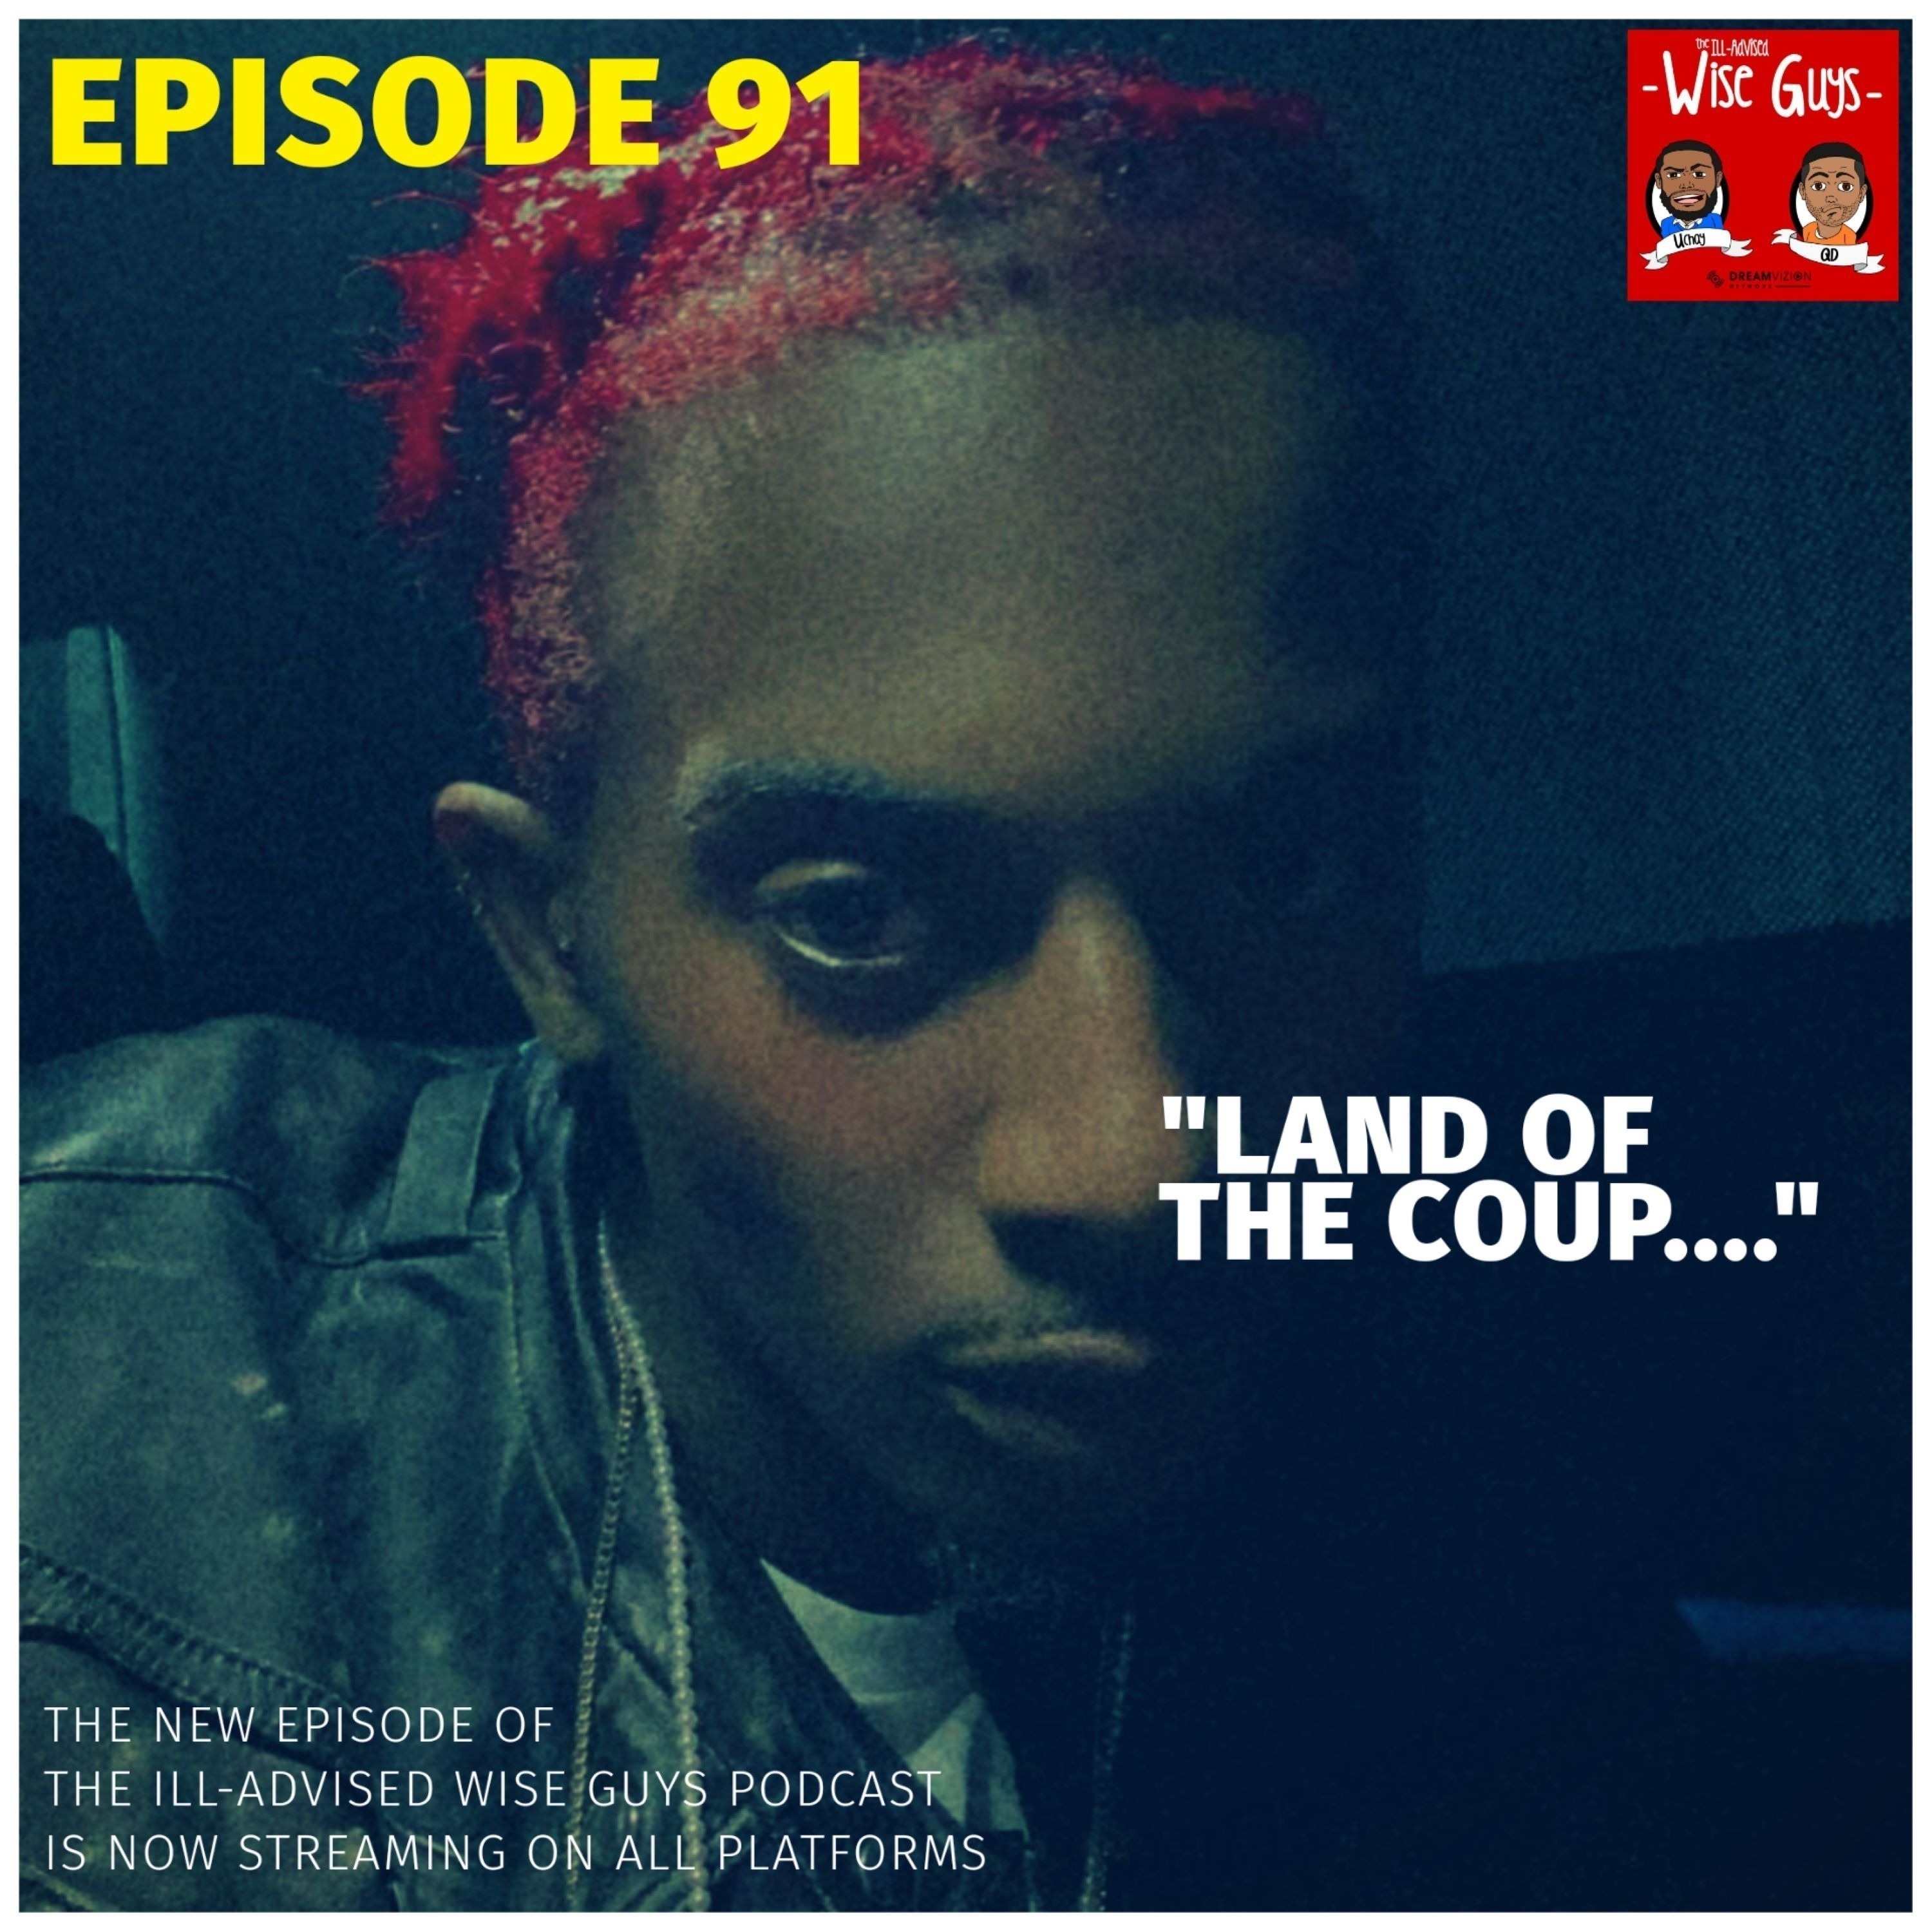 Episode 91 - "Land of the Coup..." Image